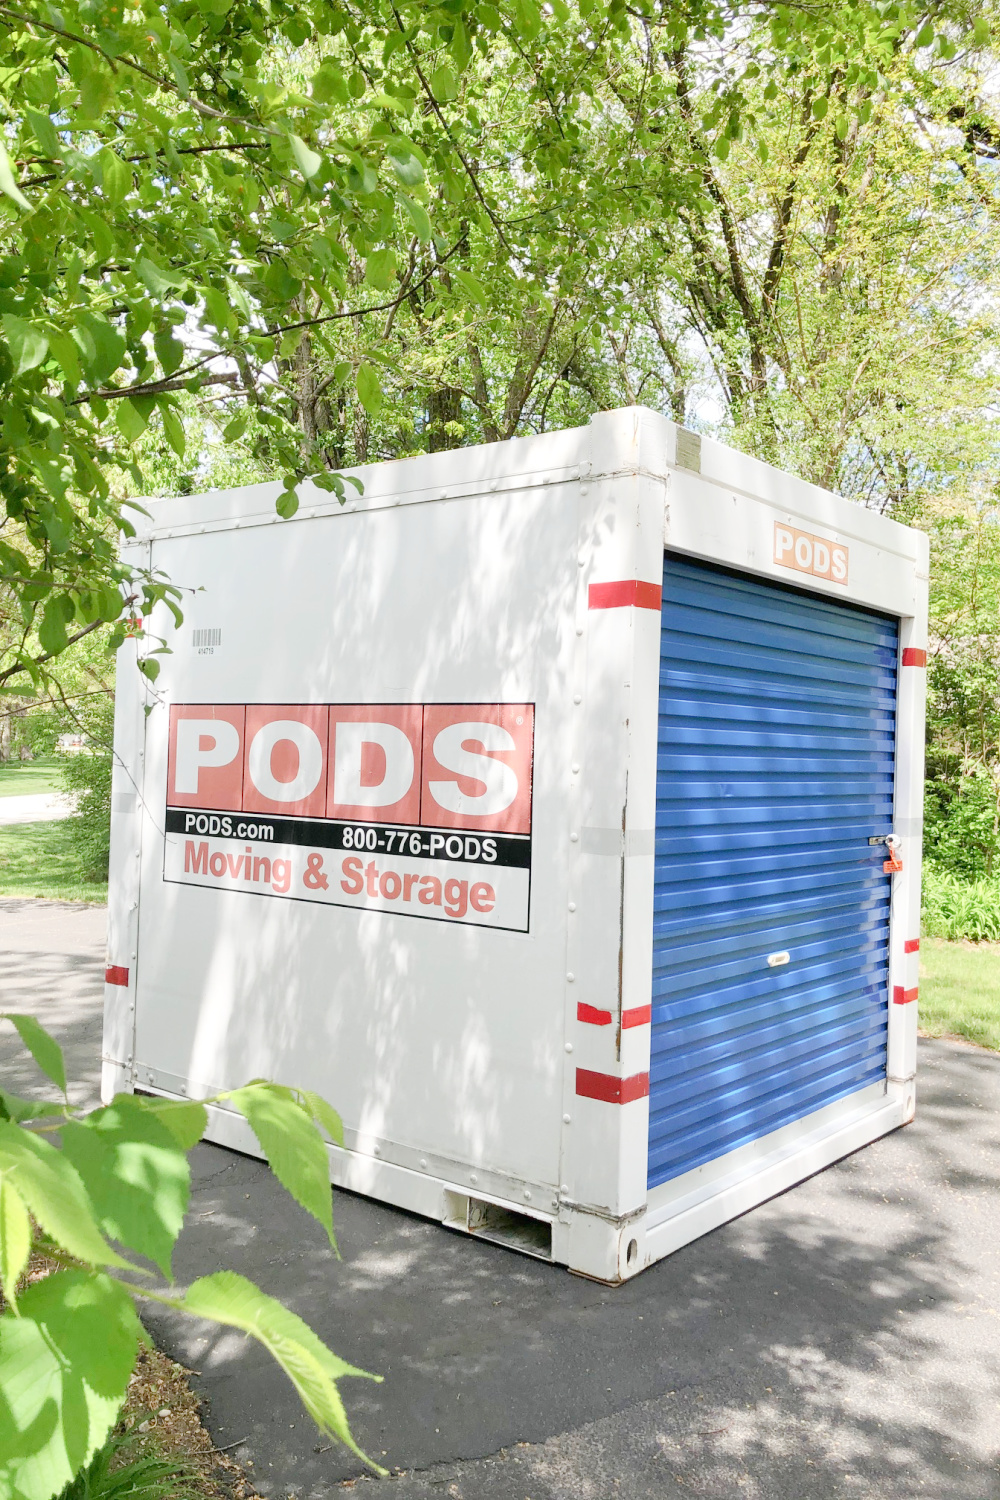 https://www.hellolovelystudio.com/wp-content/uploads/2021/05/001-pods-container-illinois-redelivery-driveway-trees-hello-lovely-studio.jpg